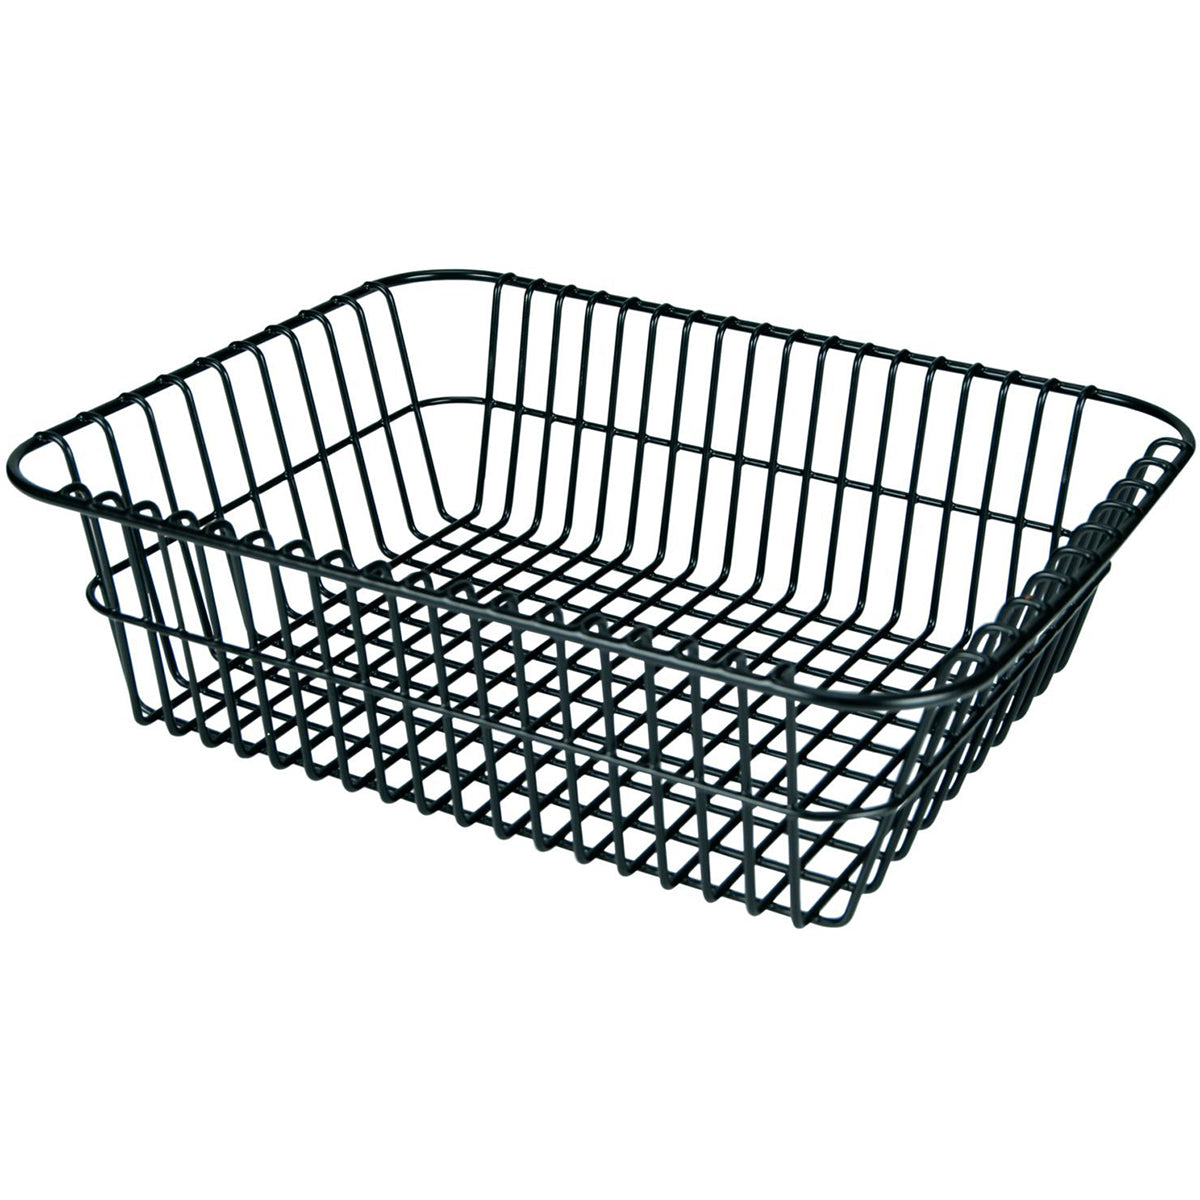 IGLOO Wire Basket for 128 qt. and 165 qt. Non-Rotomold Coolers - Black IGLOO